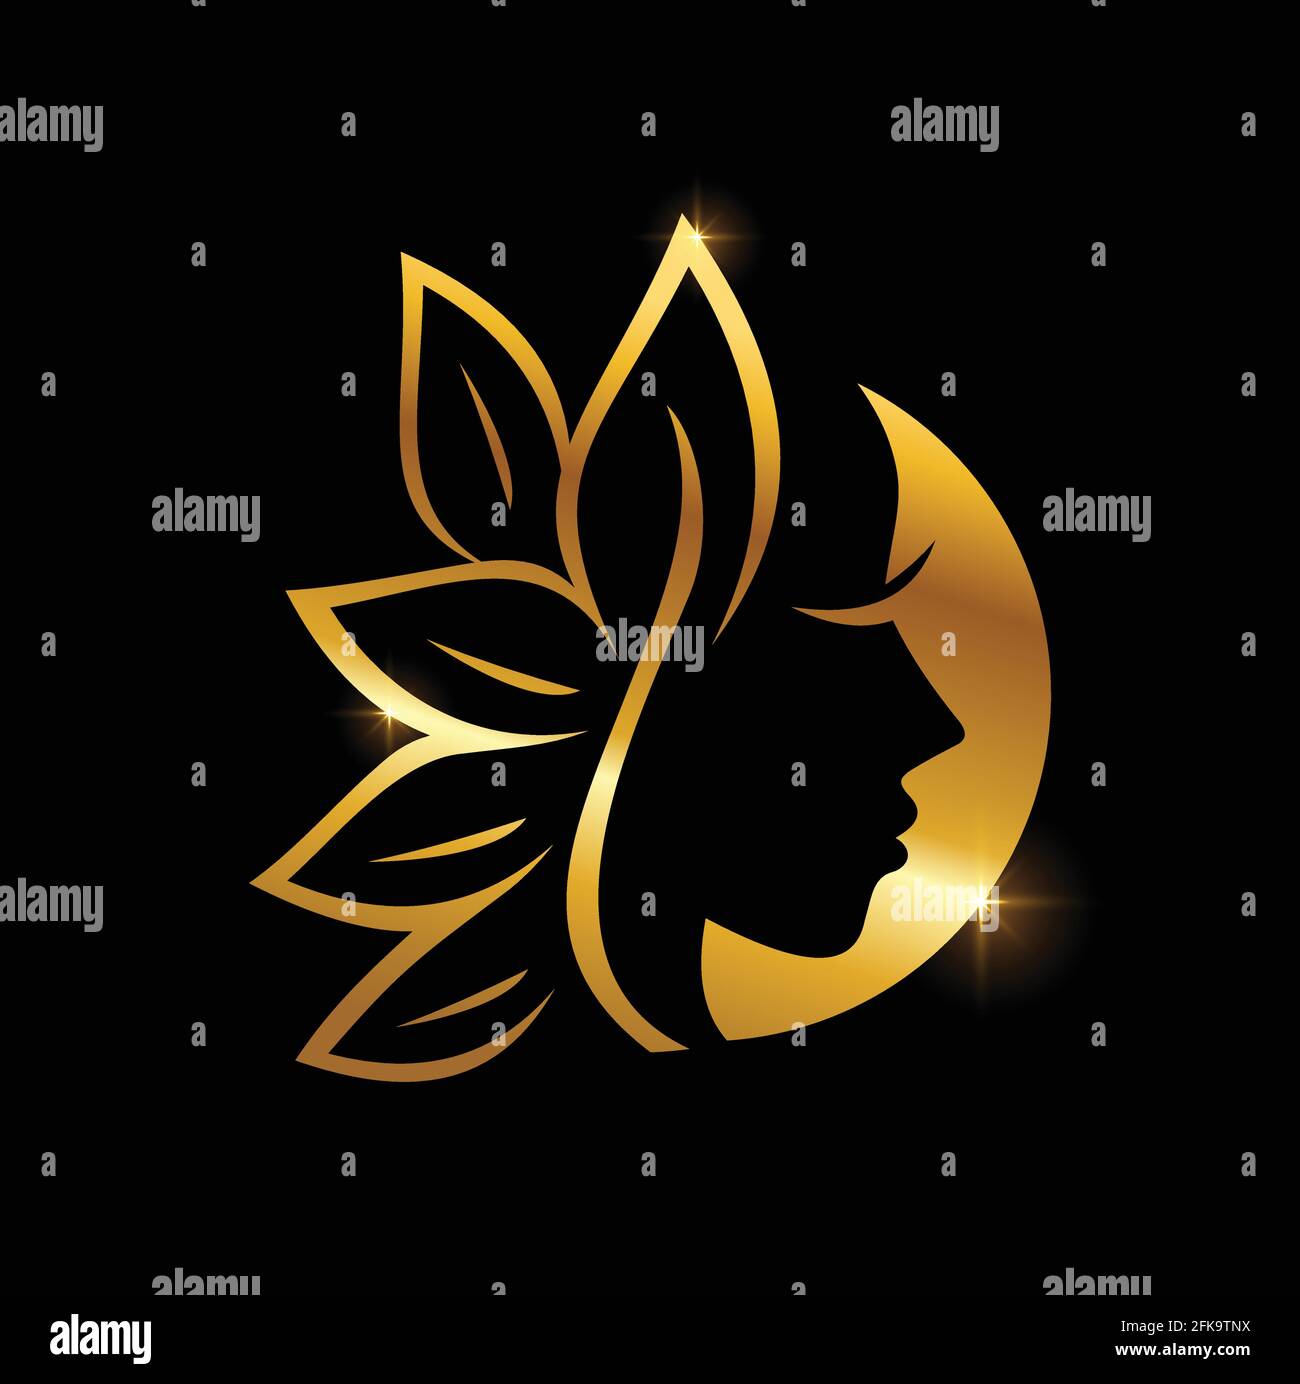 A Vector Illustration of Golden Beauty and Leaf Logo Sign in black backgound with Gold Shine Effect Stock Vector